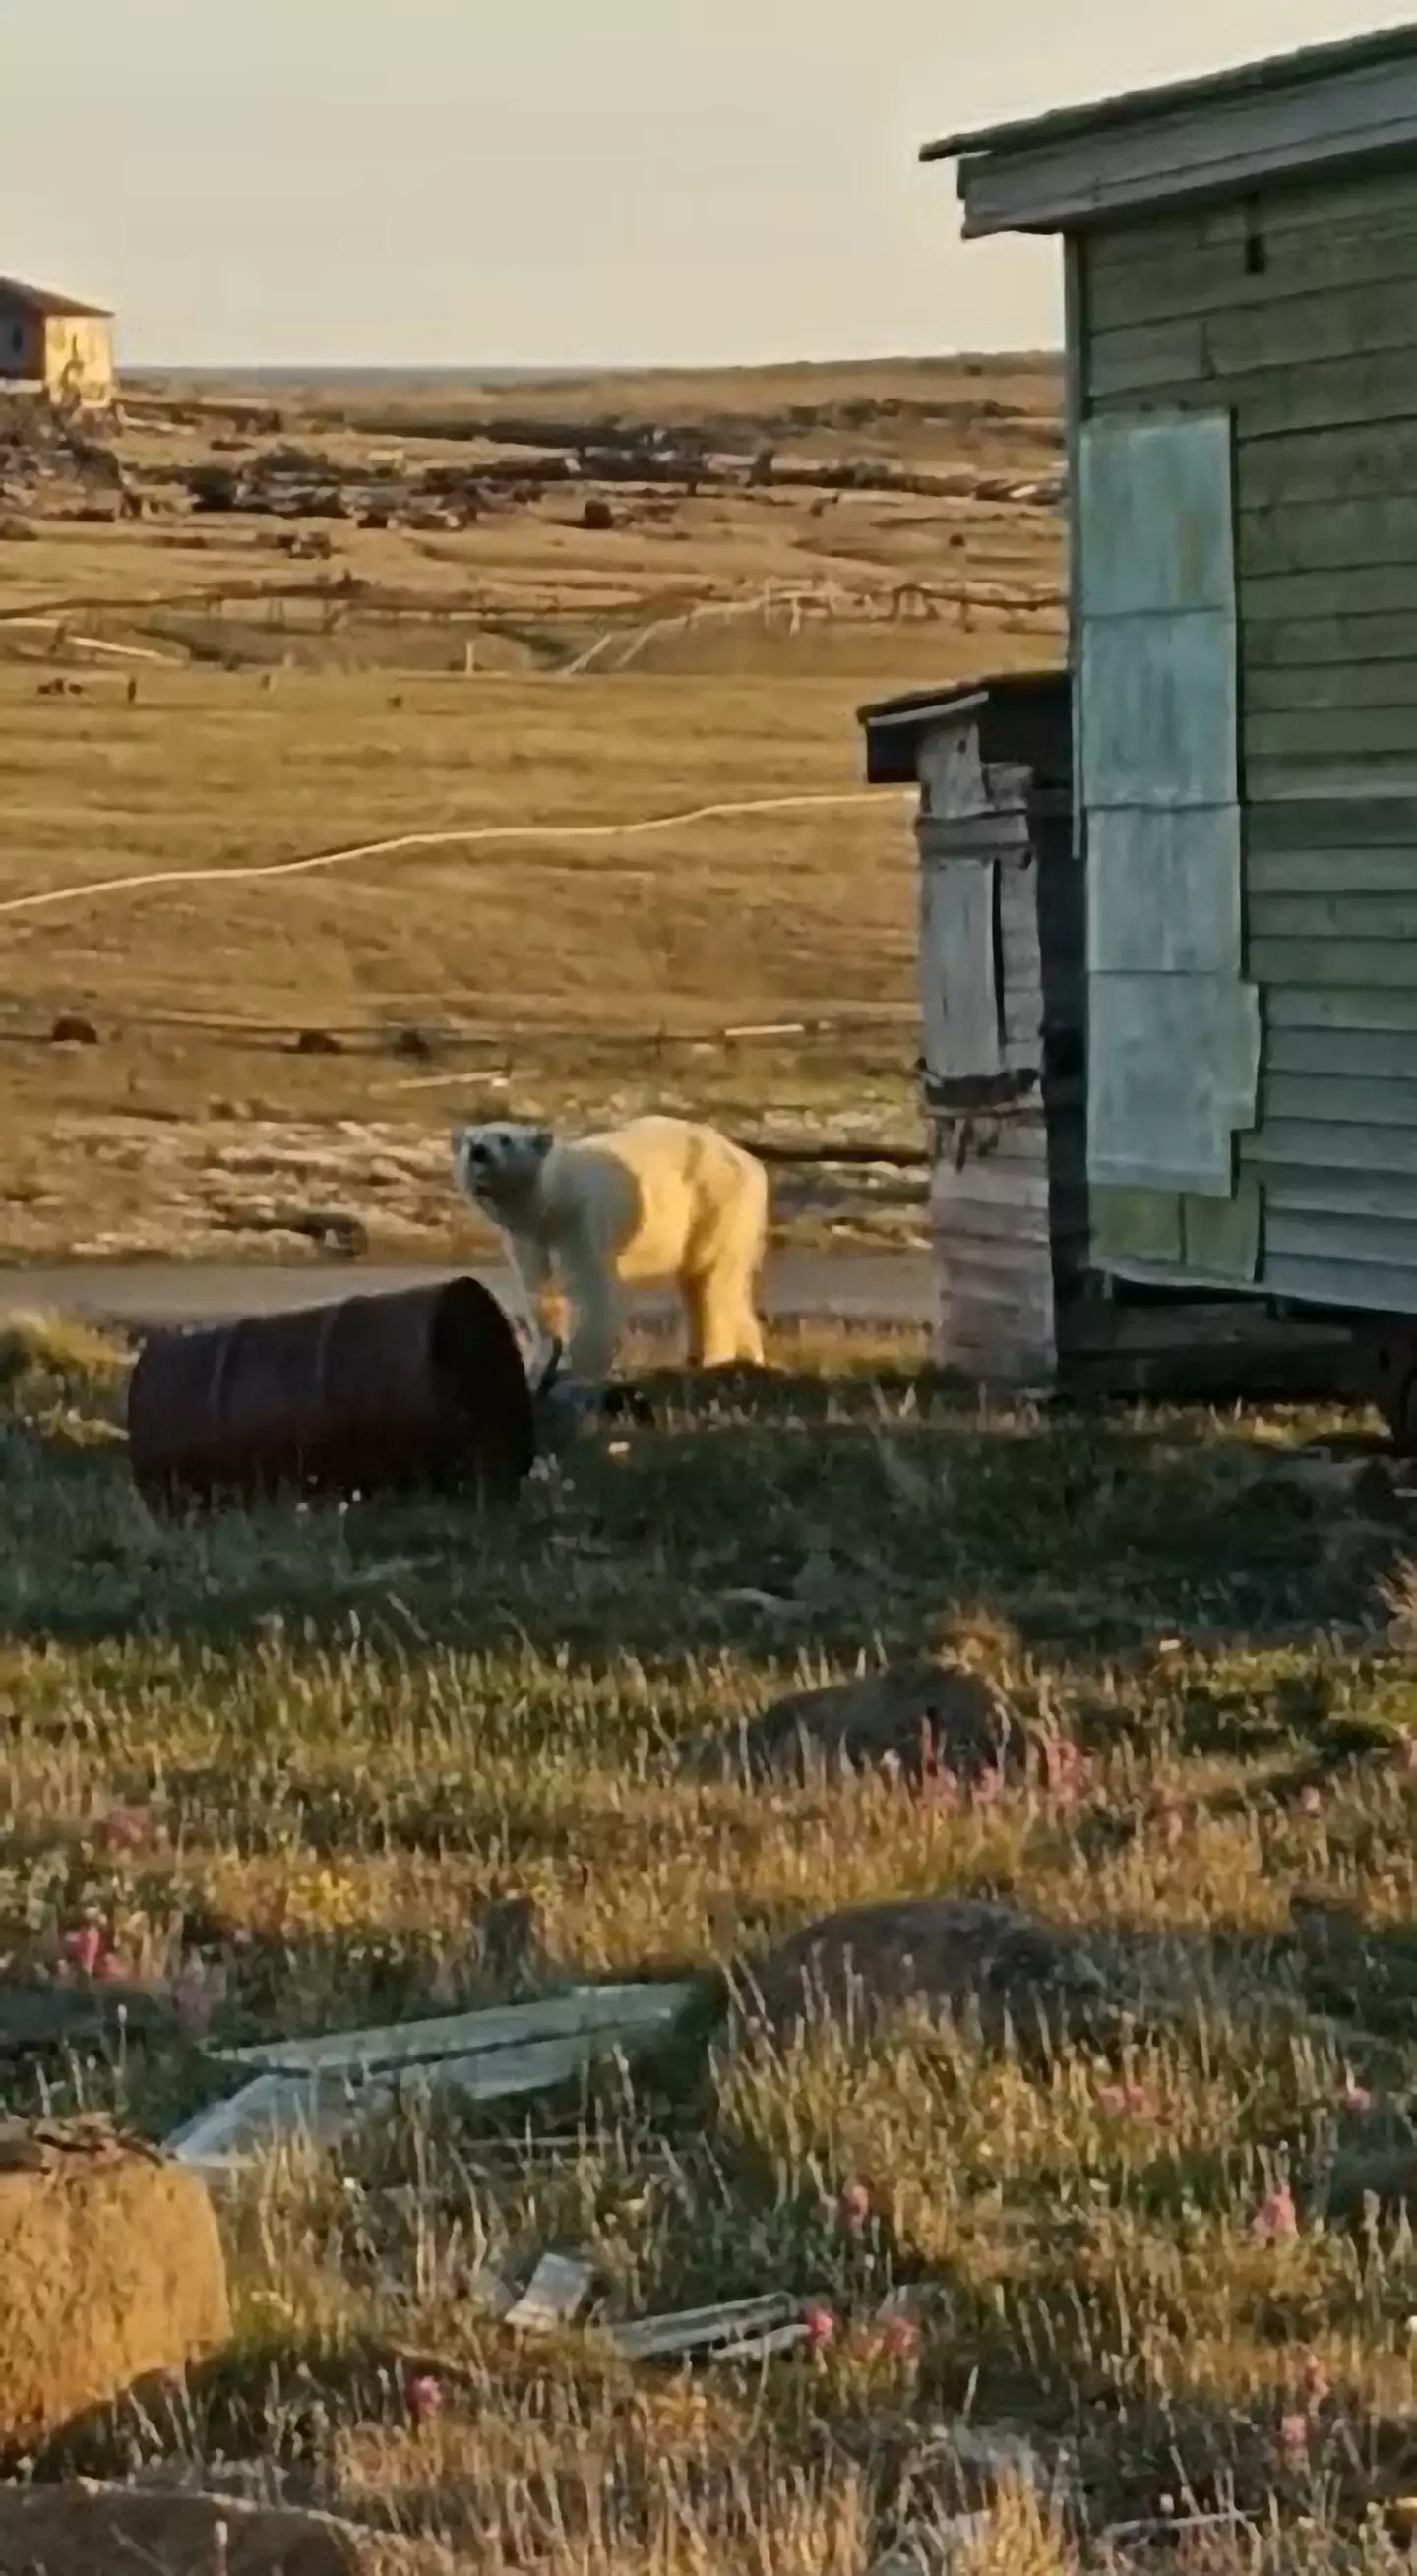 Starving and desperate, this poor polar bear came to humans for help.